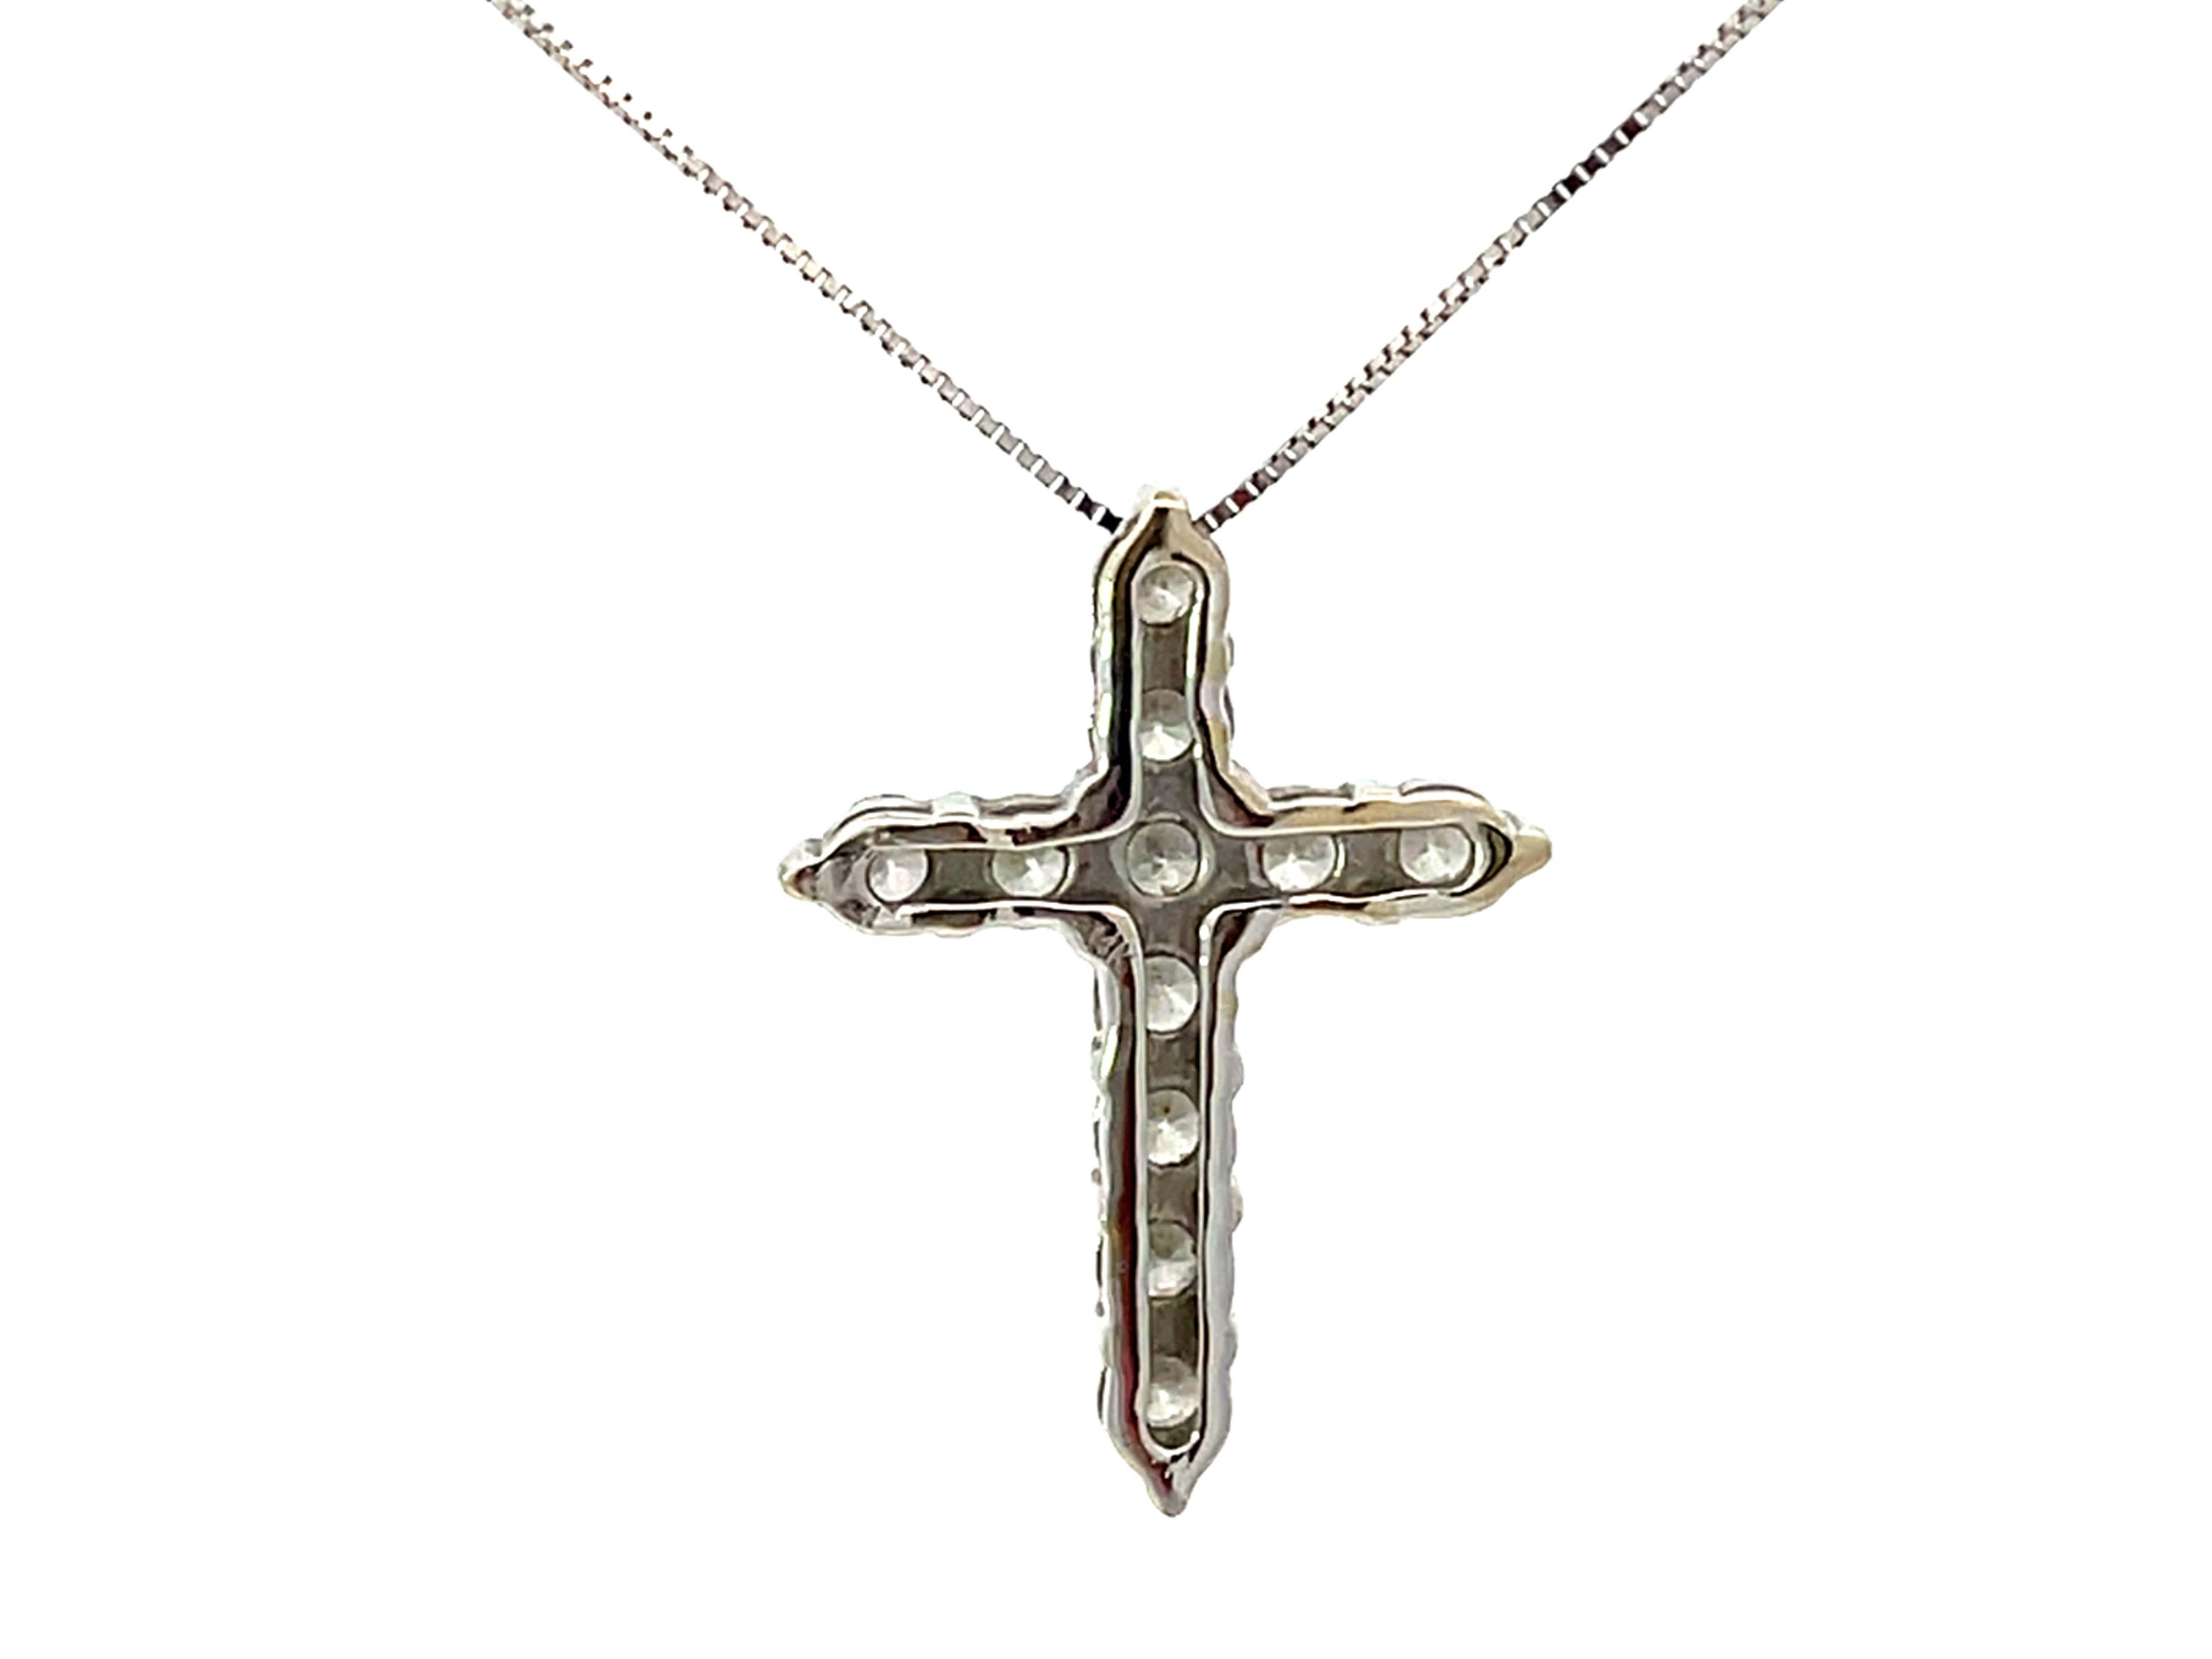 Diamond Cross Necklace Solid 14k White Gold For Sale 1